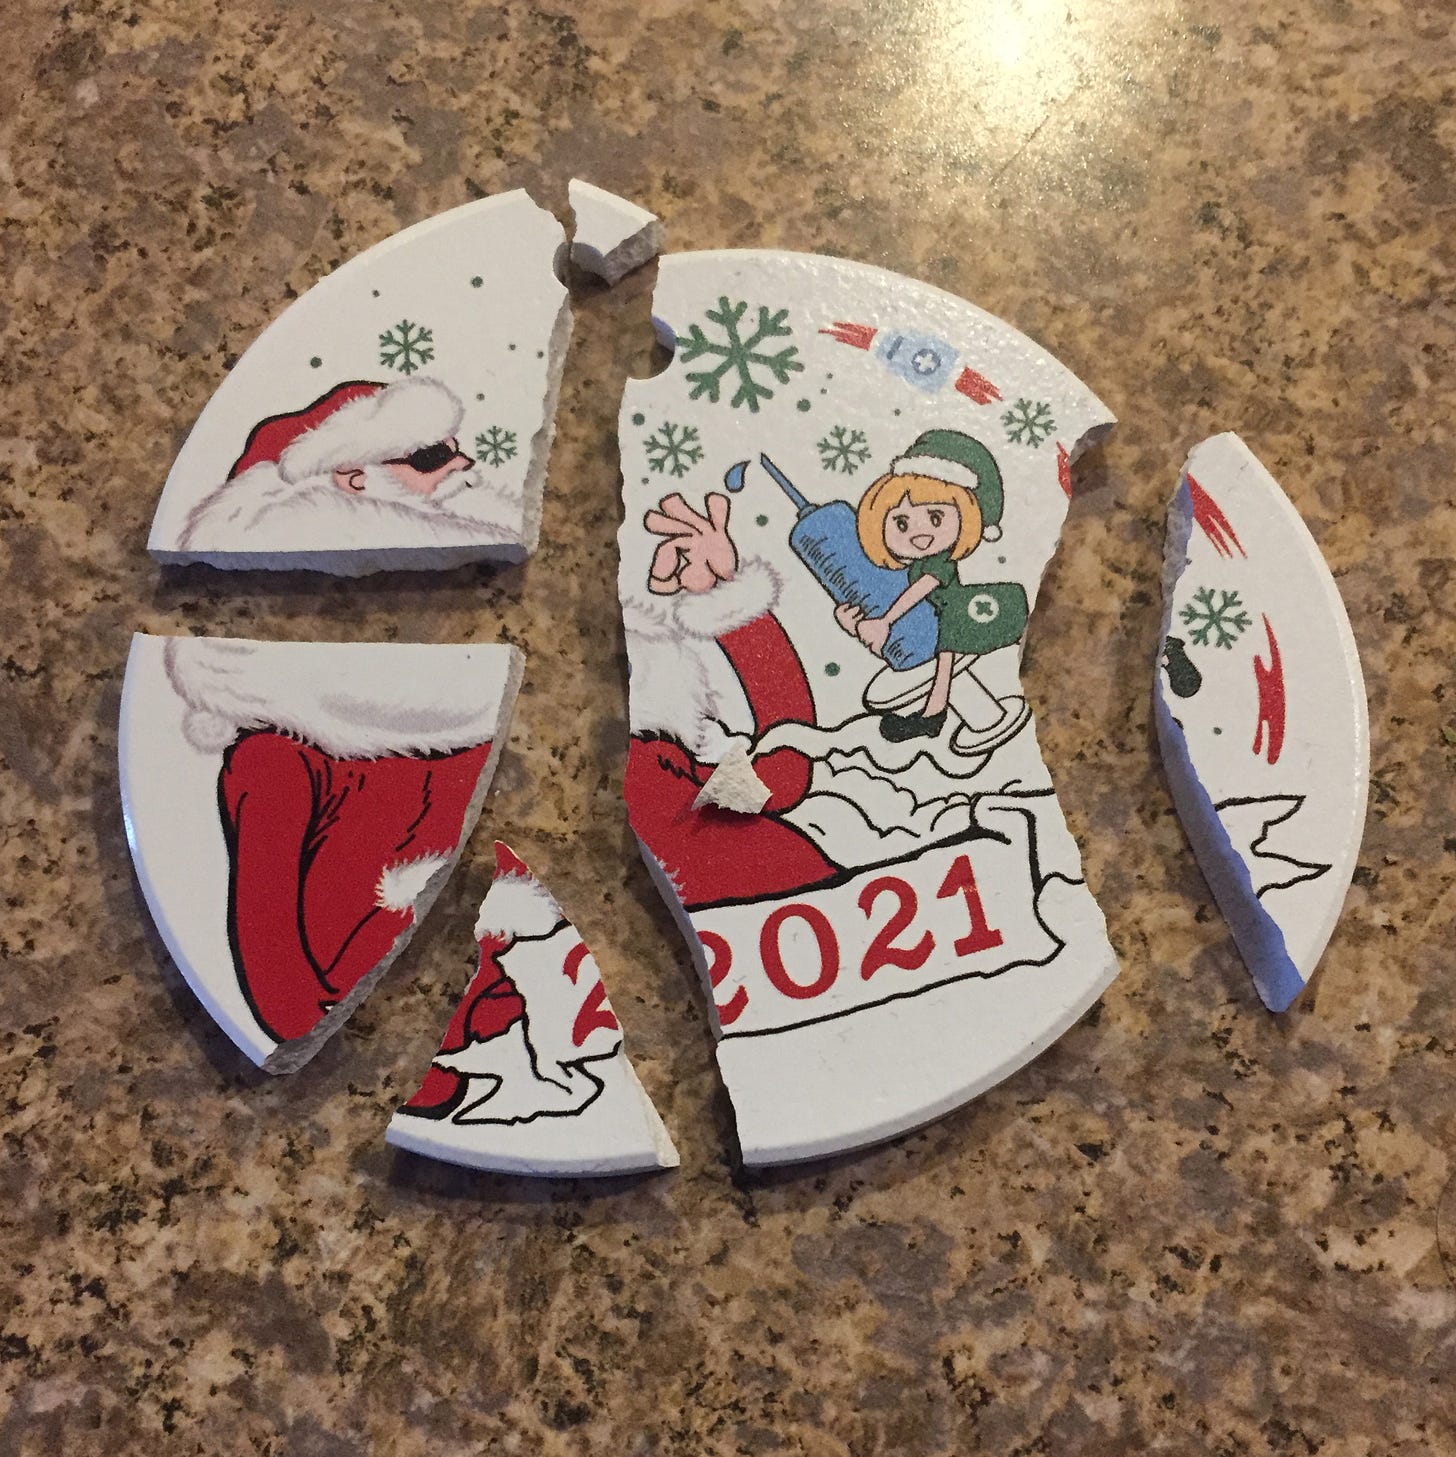 a broken Christmas ornament featuring a Santa wearing sunglasses, and a small elf holding a giant syringe. A banner at the bottom reads '2021'.